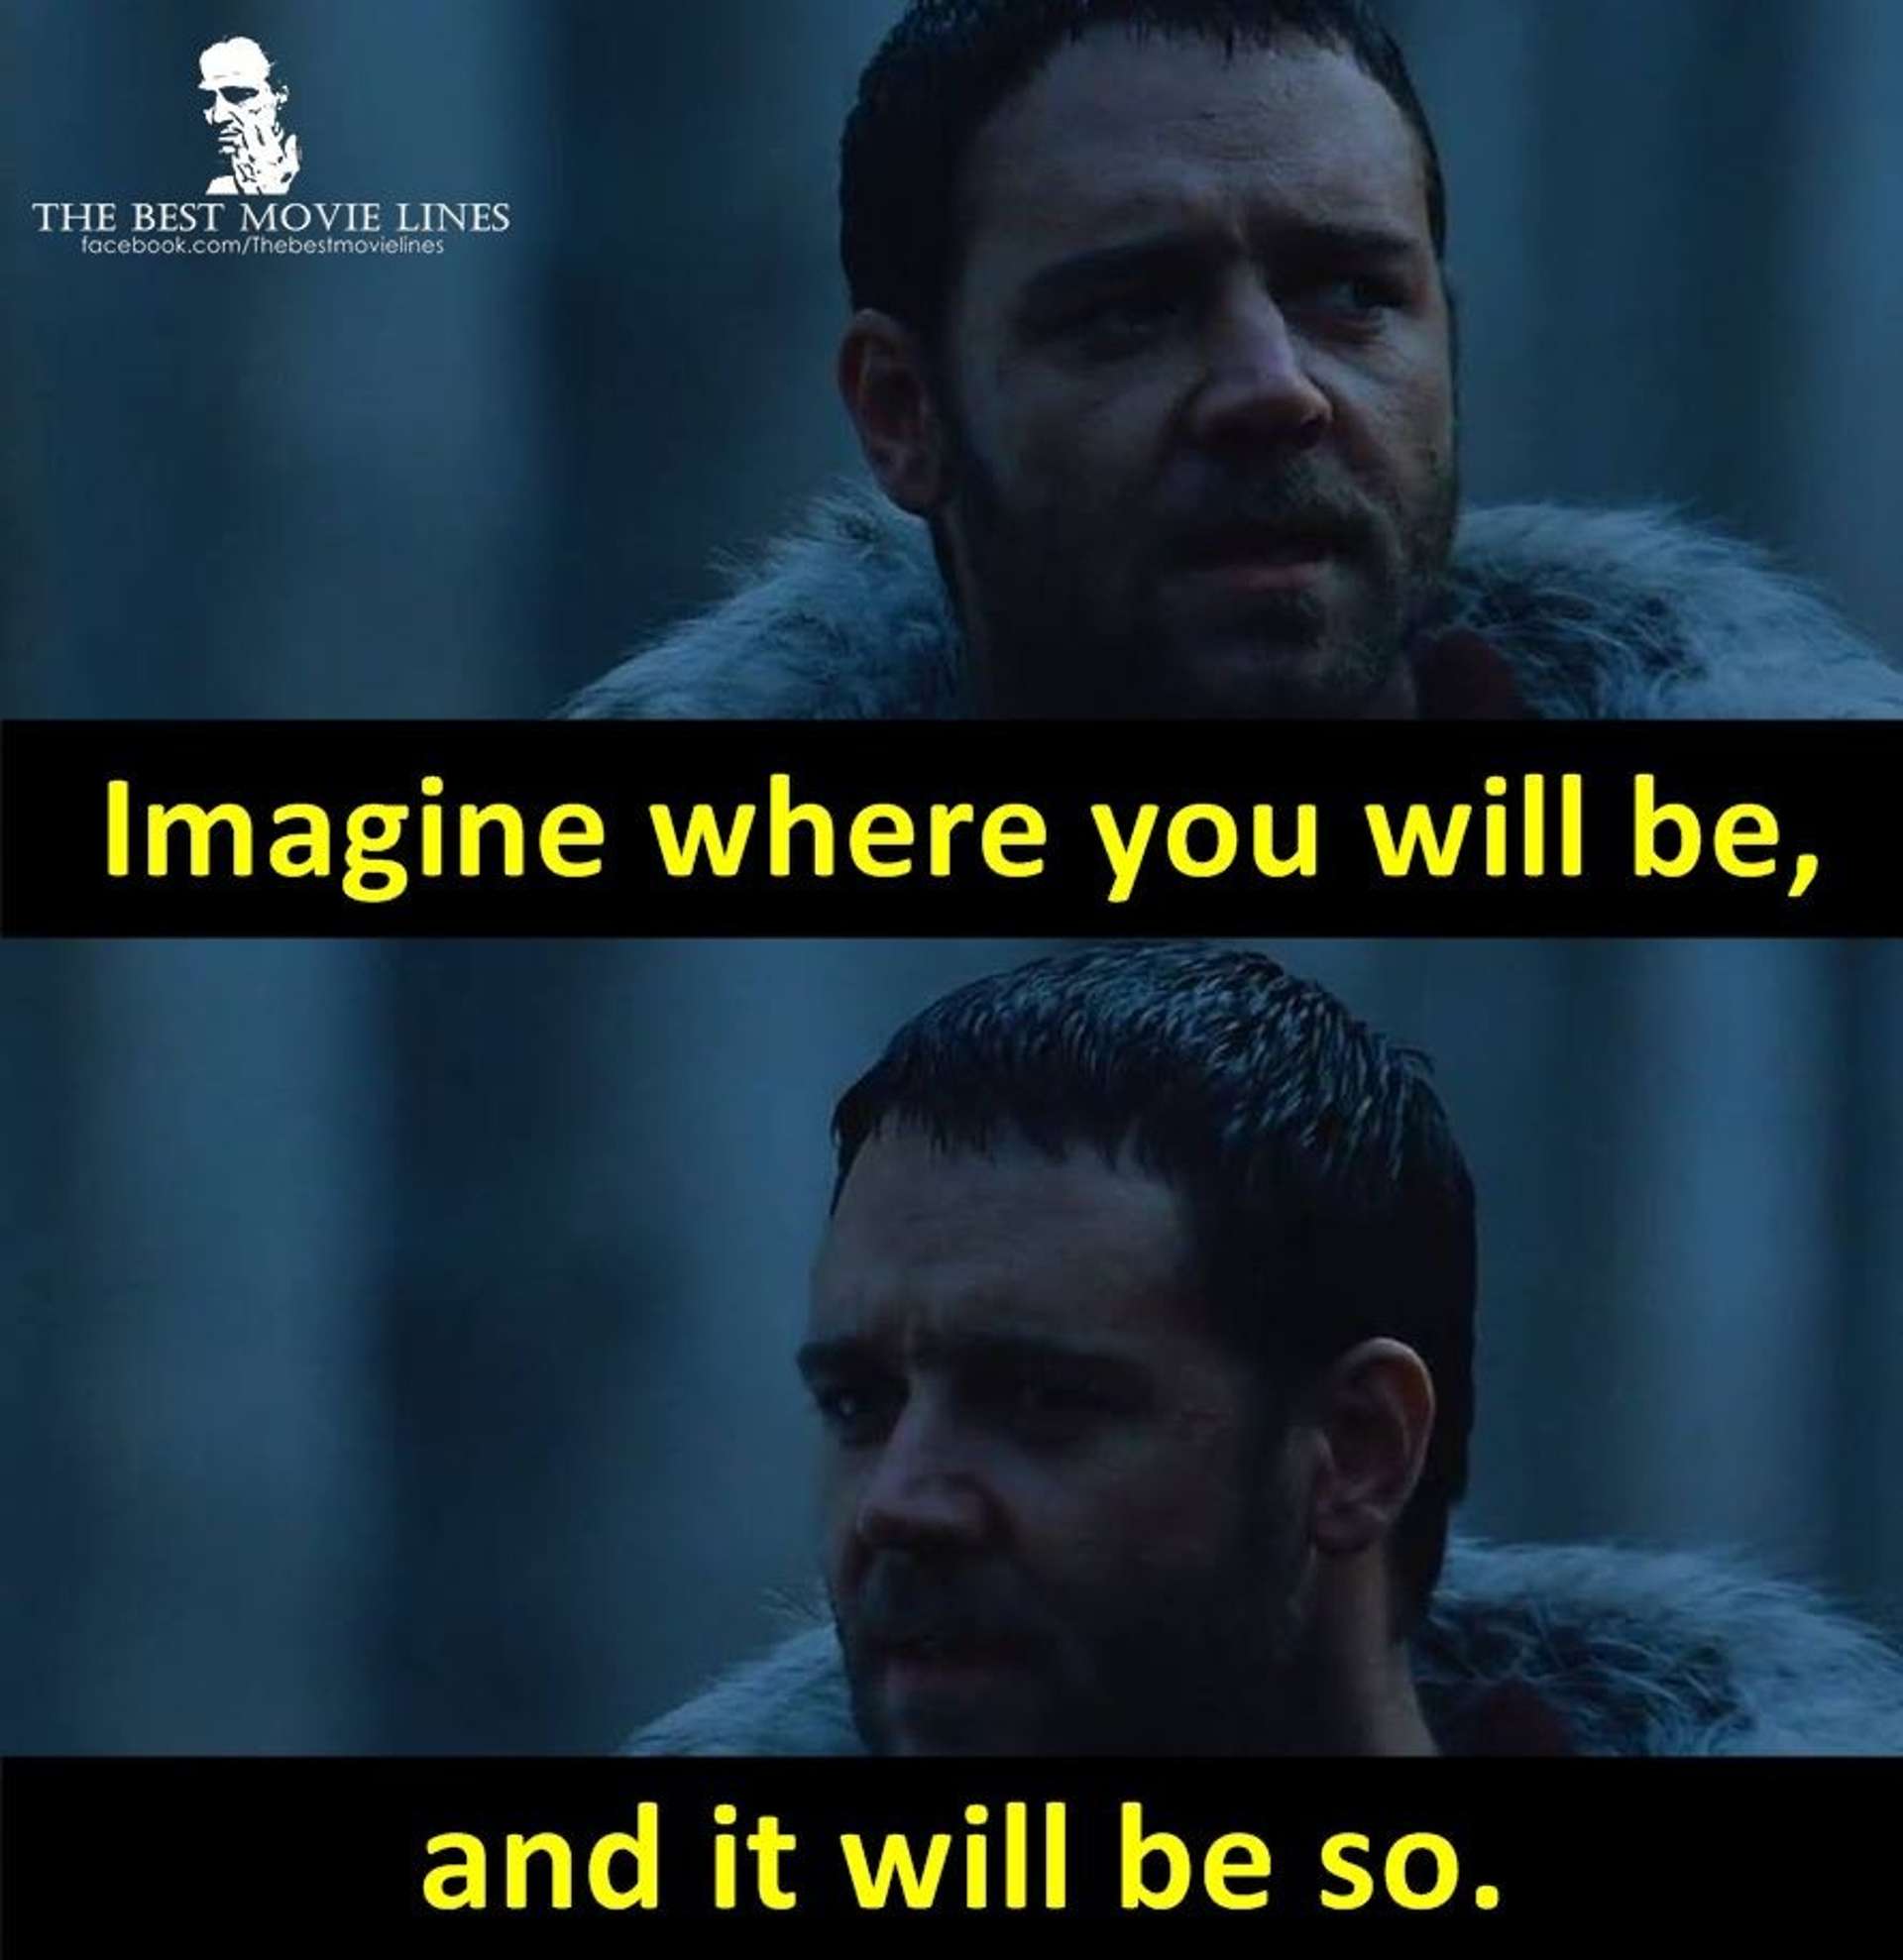 Quote by Maximus from the movie Gladiator - "Imagine where you will be and it will be so"